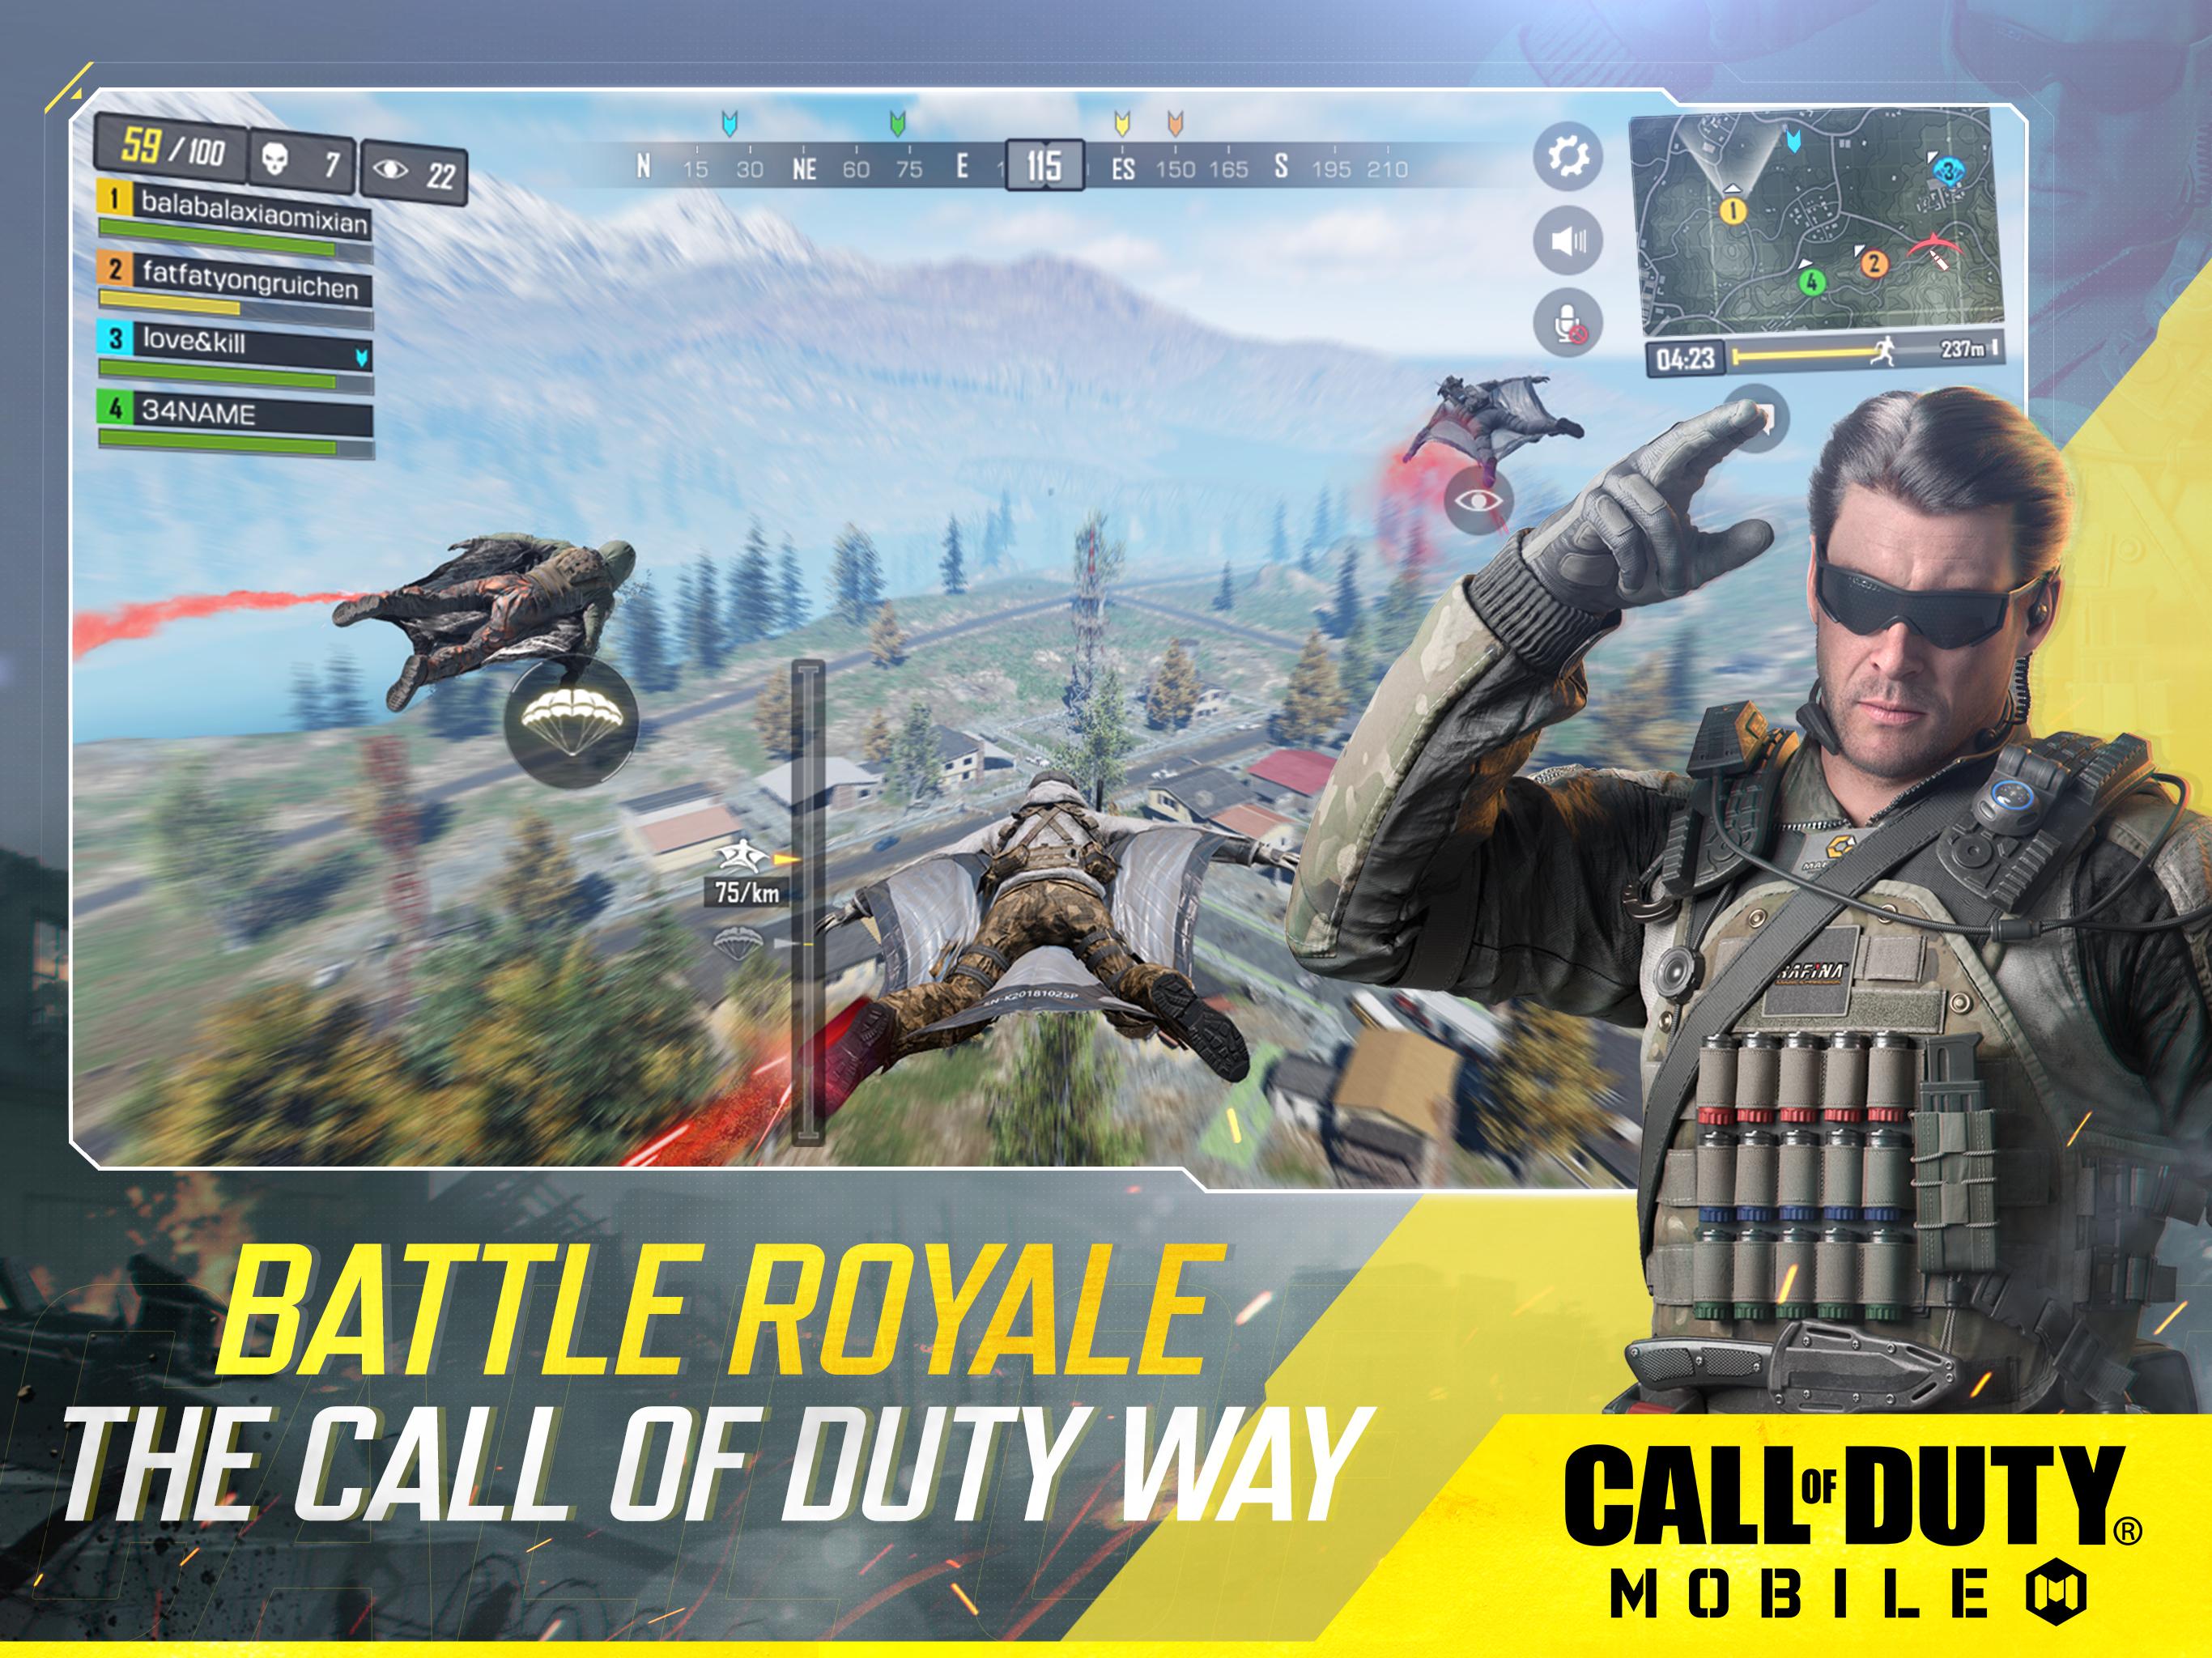 How To Run Call Of Duty Mobile Lite In Pc Codadd.Com - Call ... - 